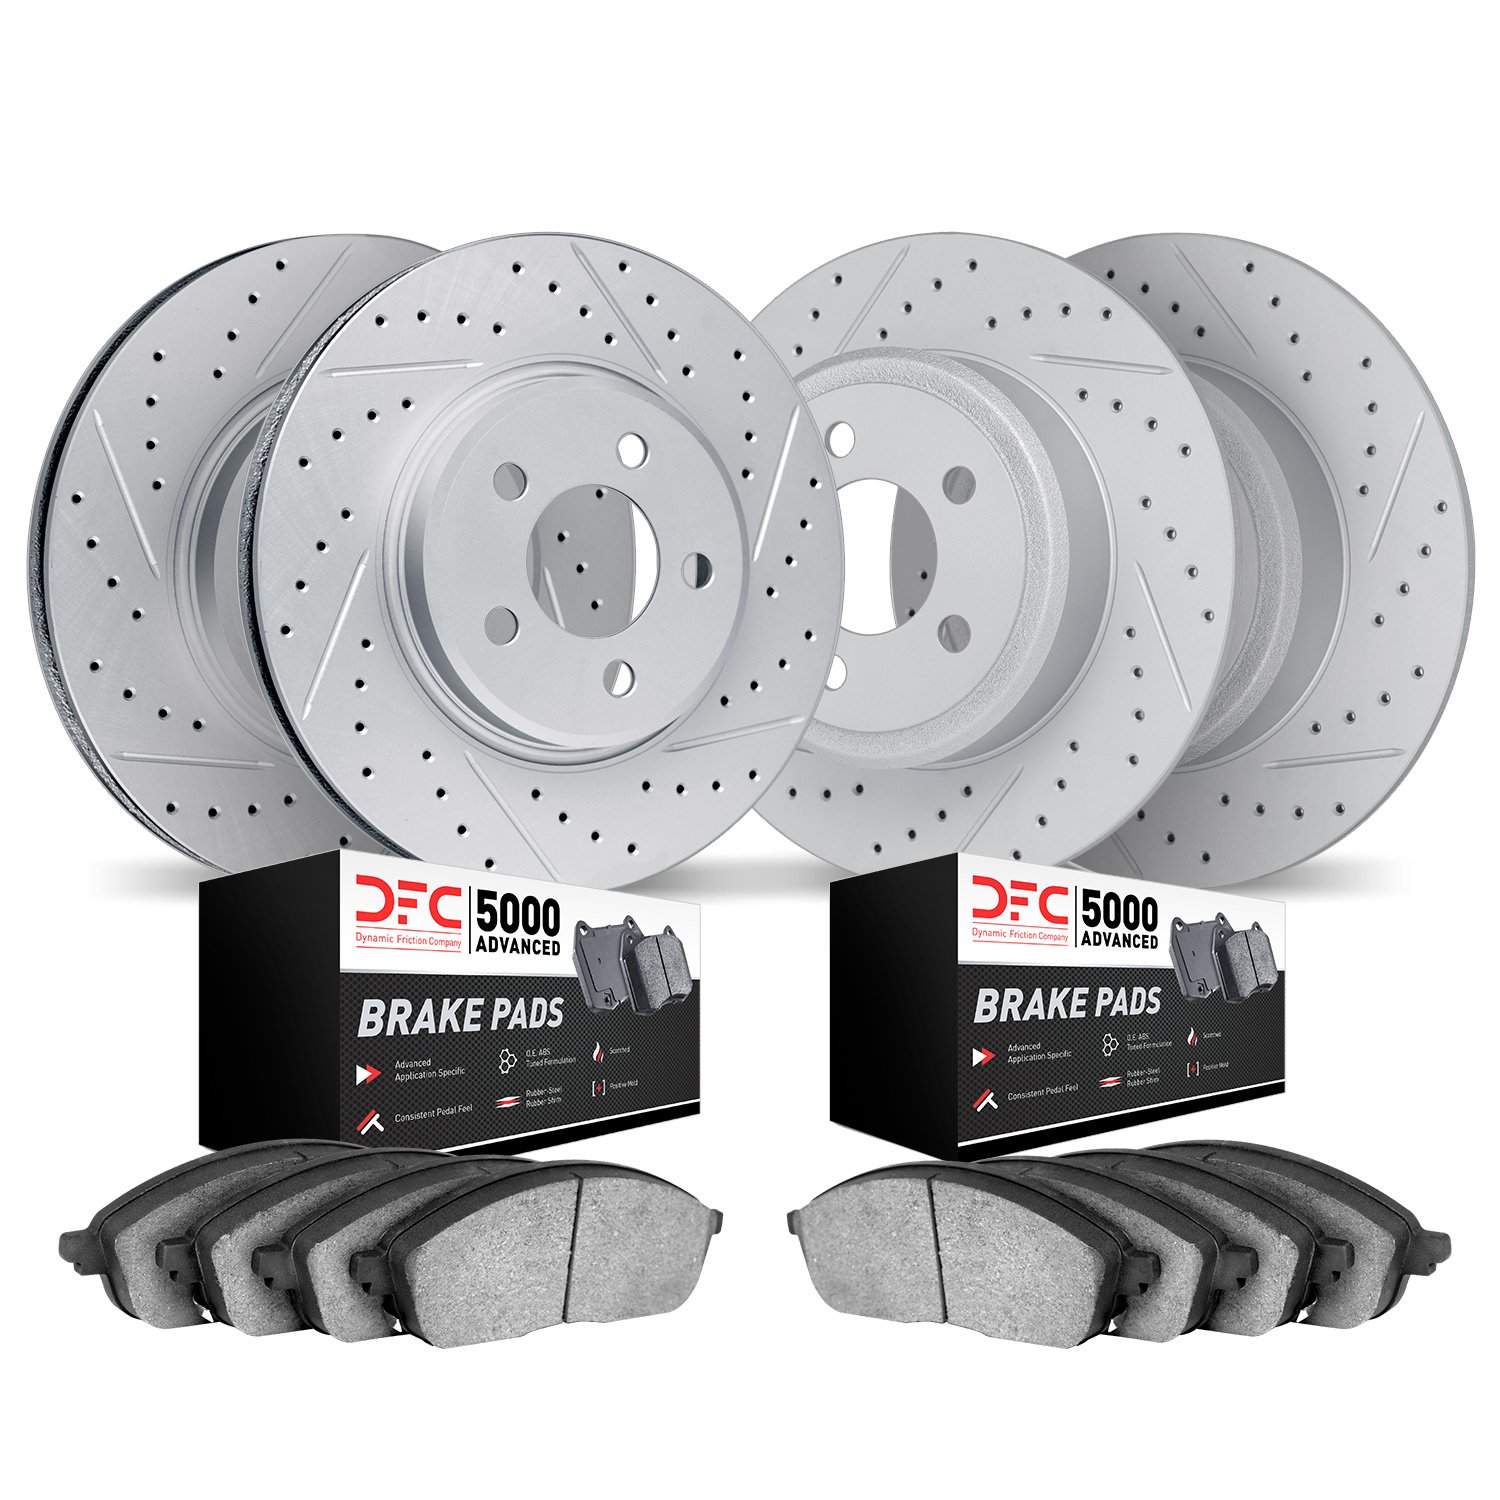 2504-59047 Geoperformance Drilled/Slotted Rotors w/5000 Advanced Brake Pads Kit, Fits Select Acura/Honda, Position: Front and Re